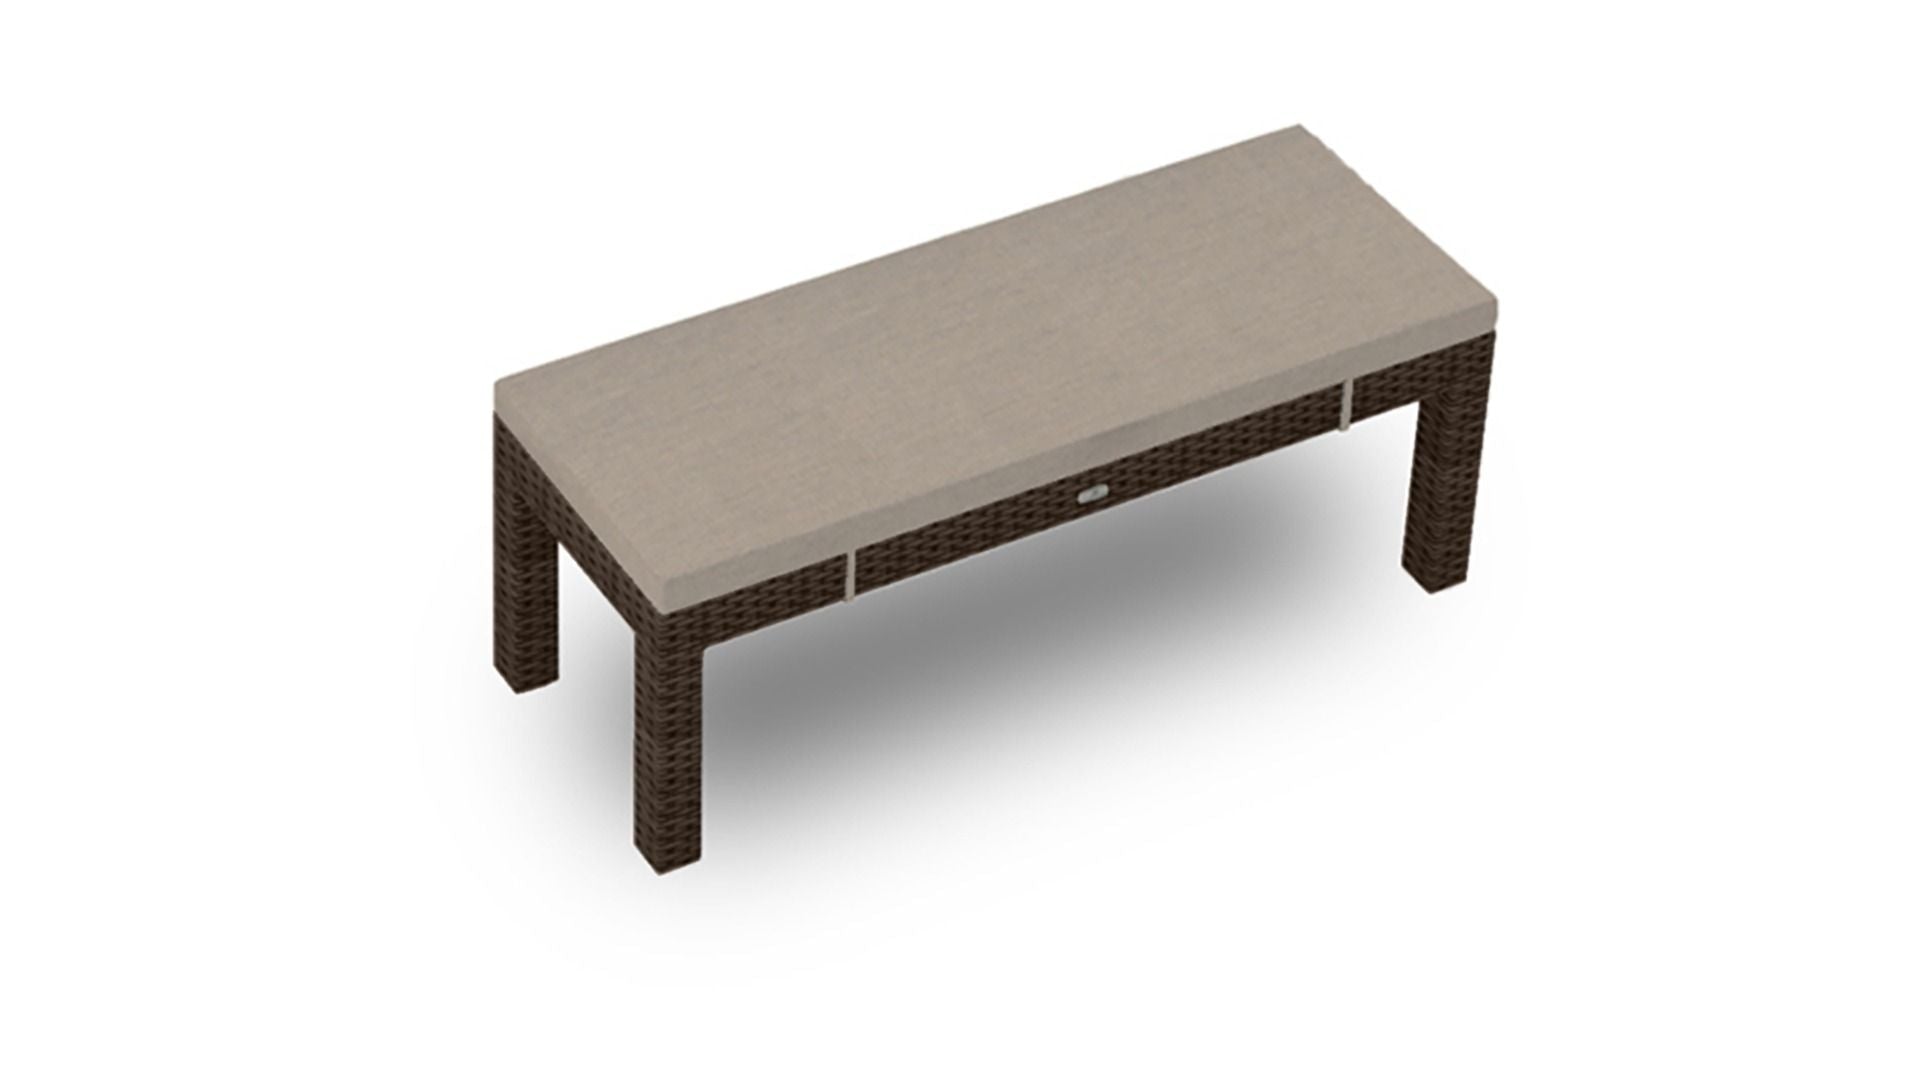 Harmonia Living Outdoor Dining Chair Canvas Flax Harmonia Living - Arden 2-Seater Dining Bench | HL-ARD-CH-2DB